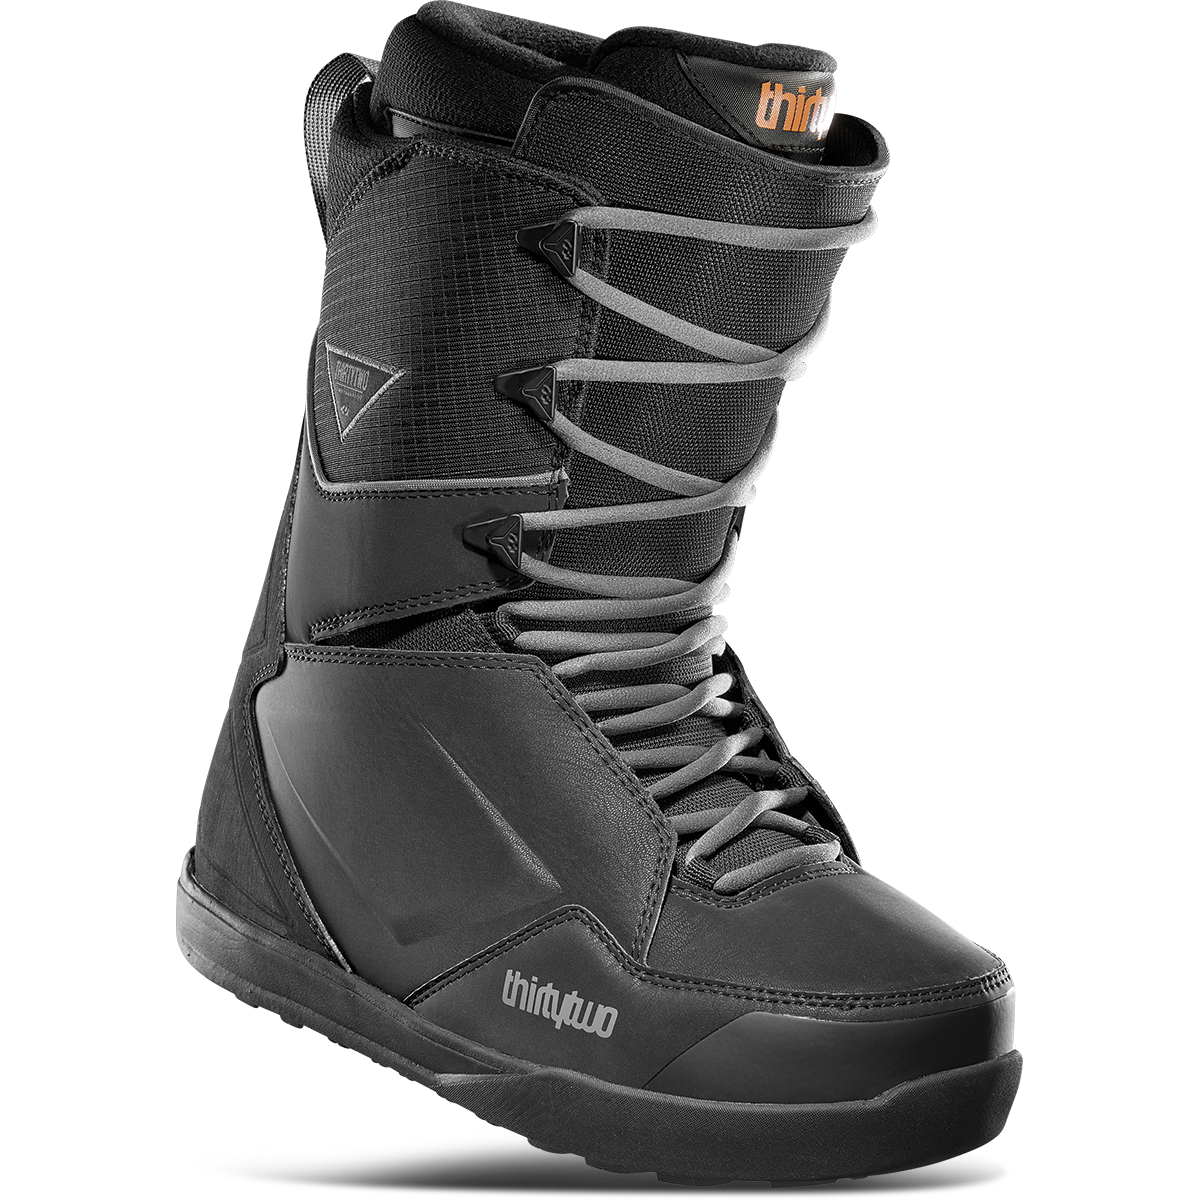 ThirtyTwo 2022 Lashed Snowboard Boot